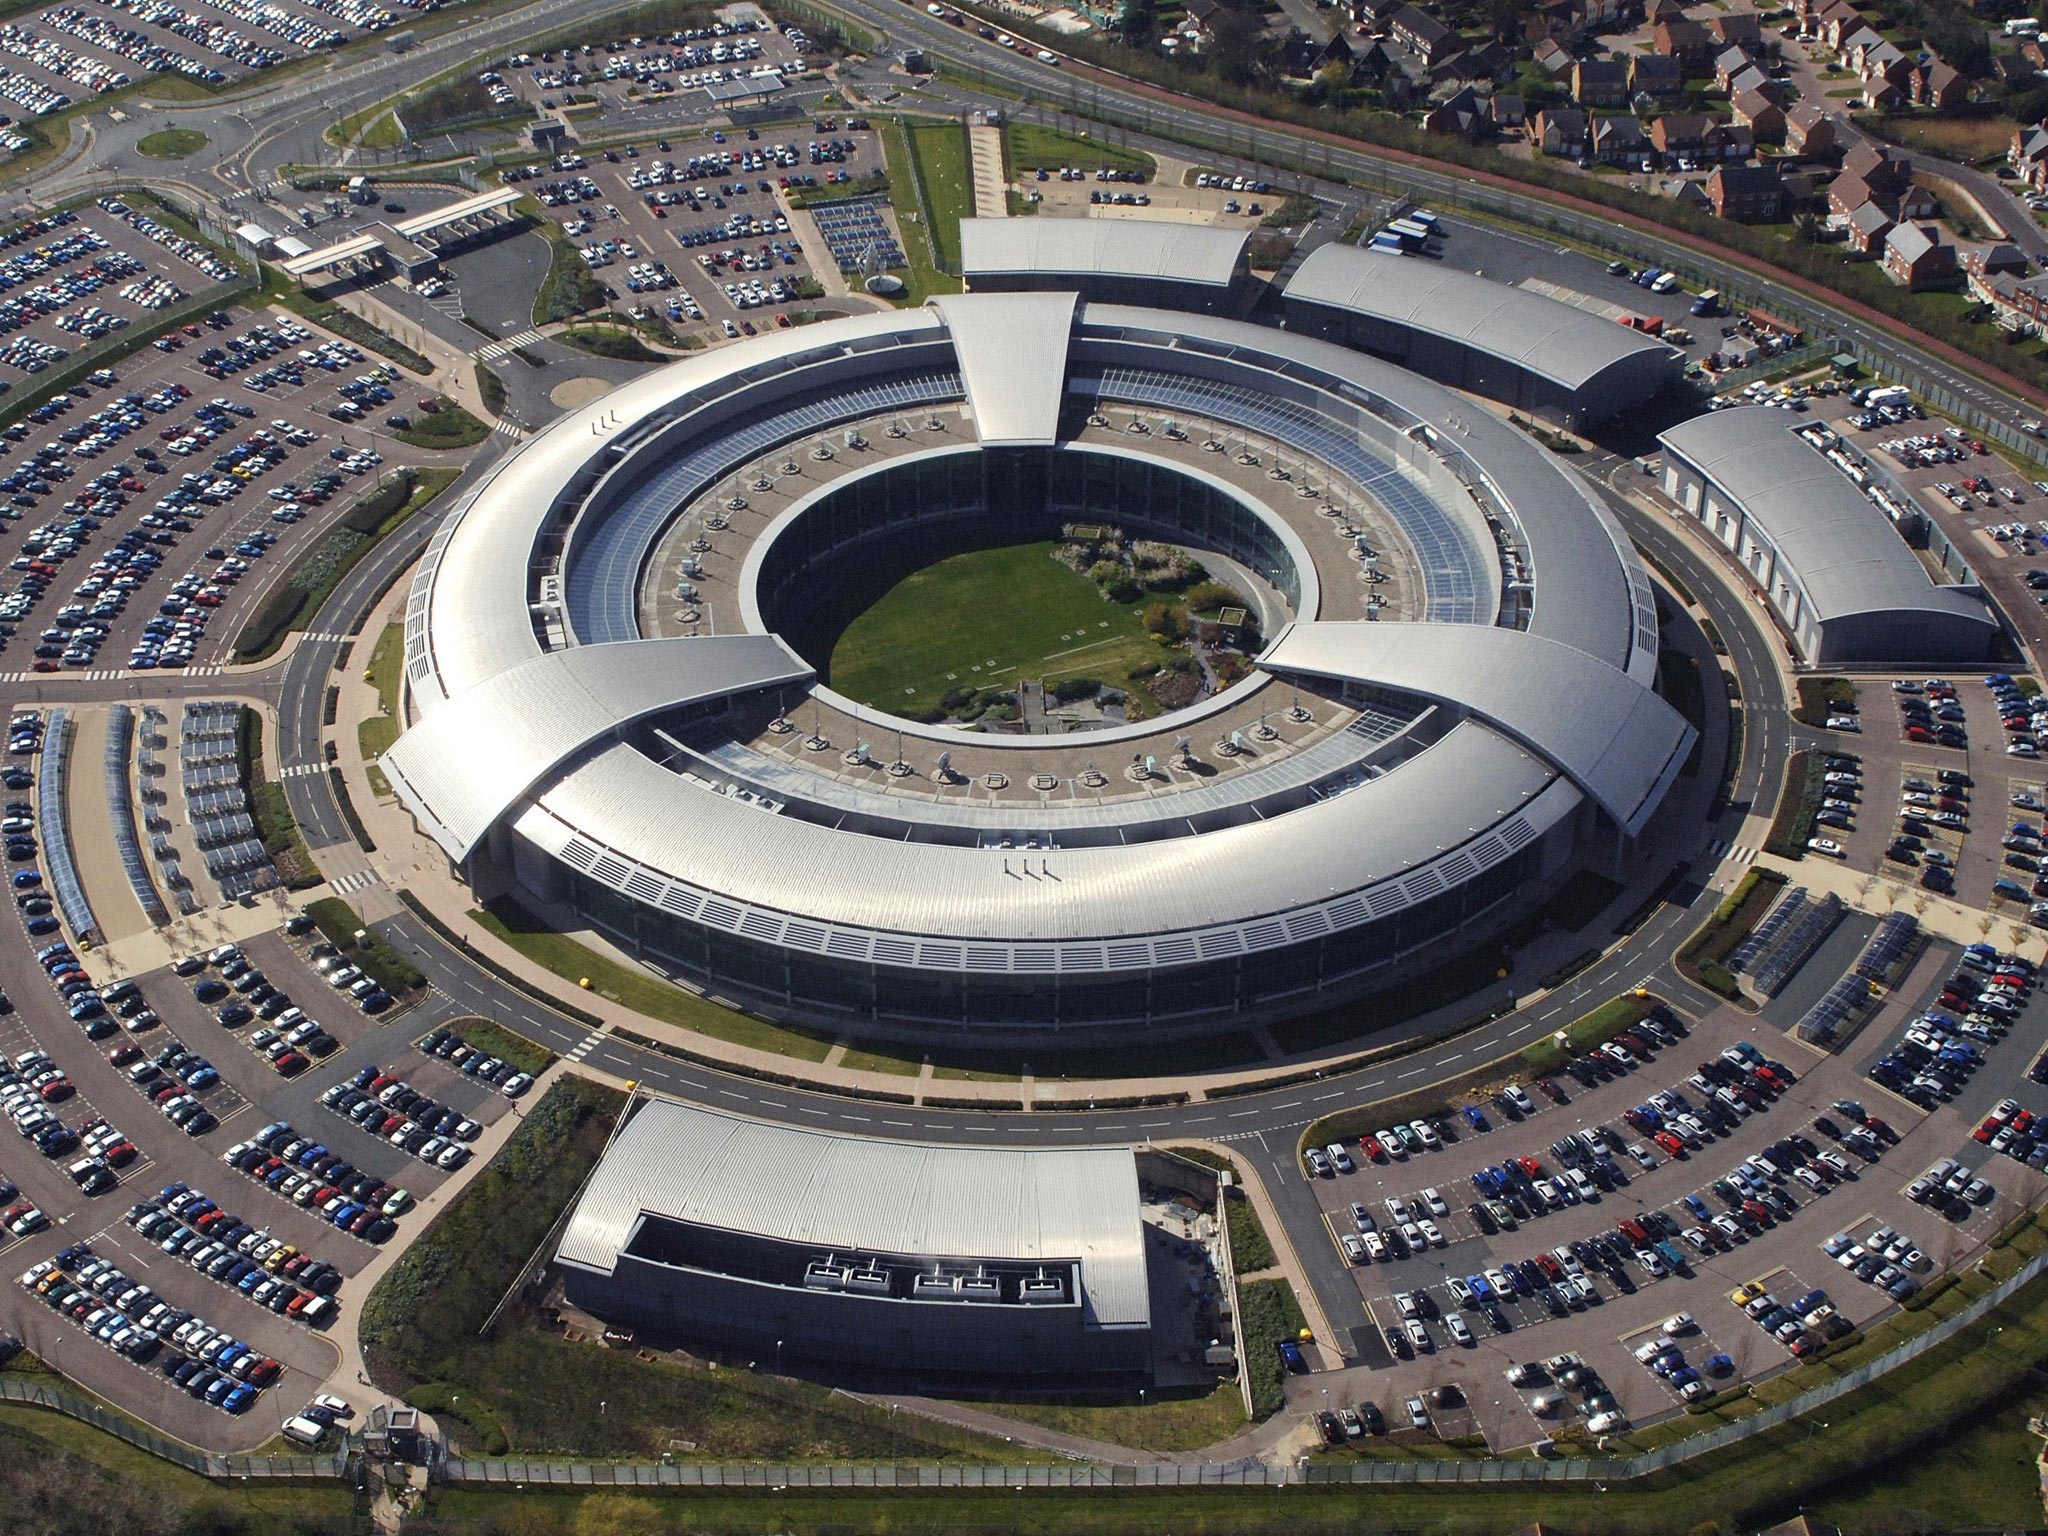 ISPs are protesting that GCHQ has used illegal tactics